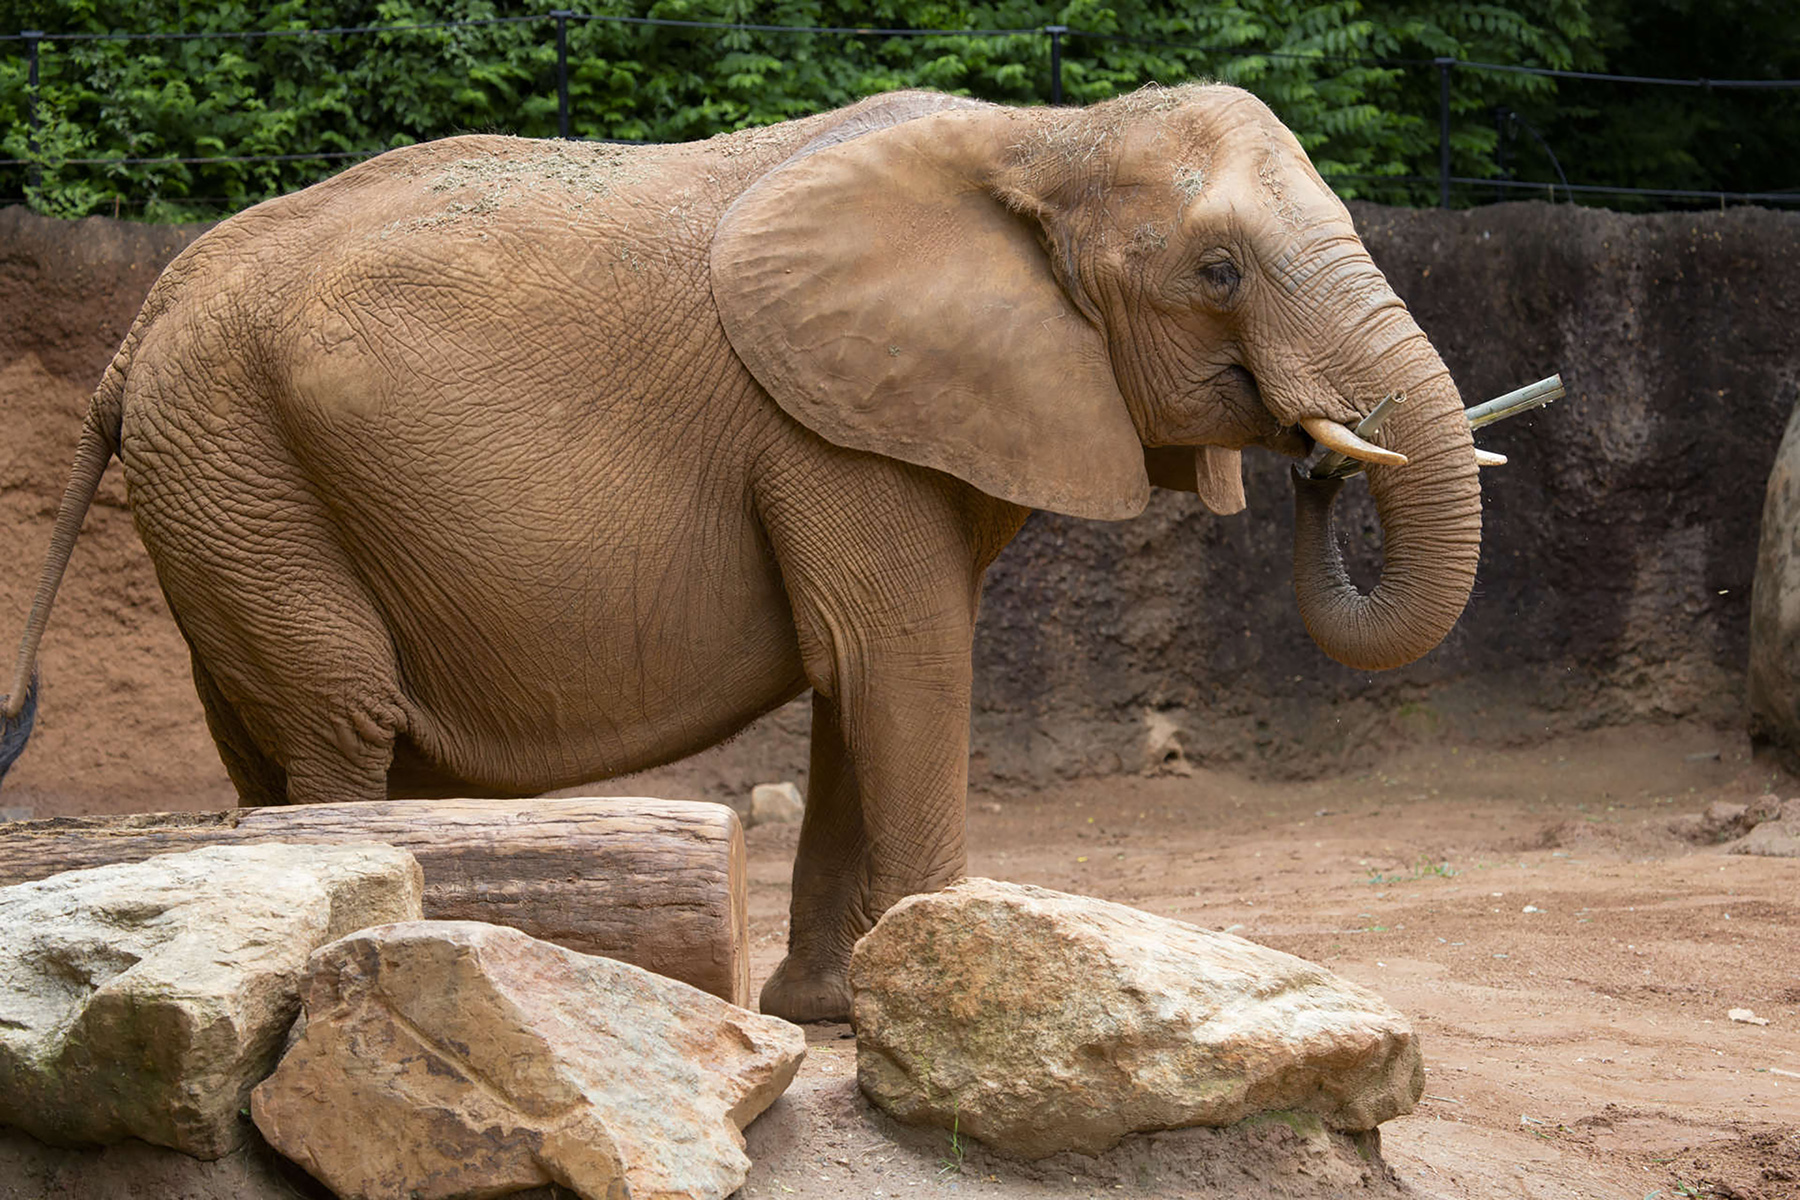 A new study demonstrates the physics that elephants use to feed themselves the massive quantities of leaves, fruit and roots needed to sustain their multi-ton bodies. (Credit: Zoo Atlanta)